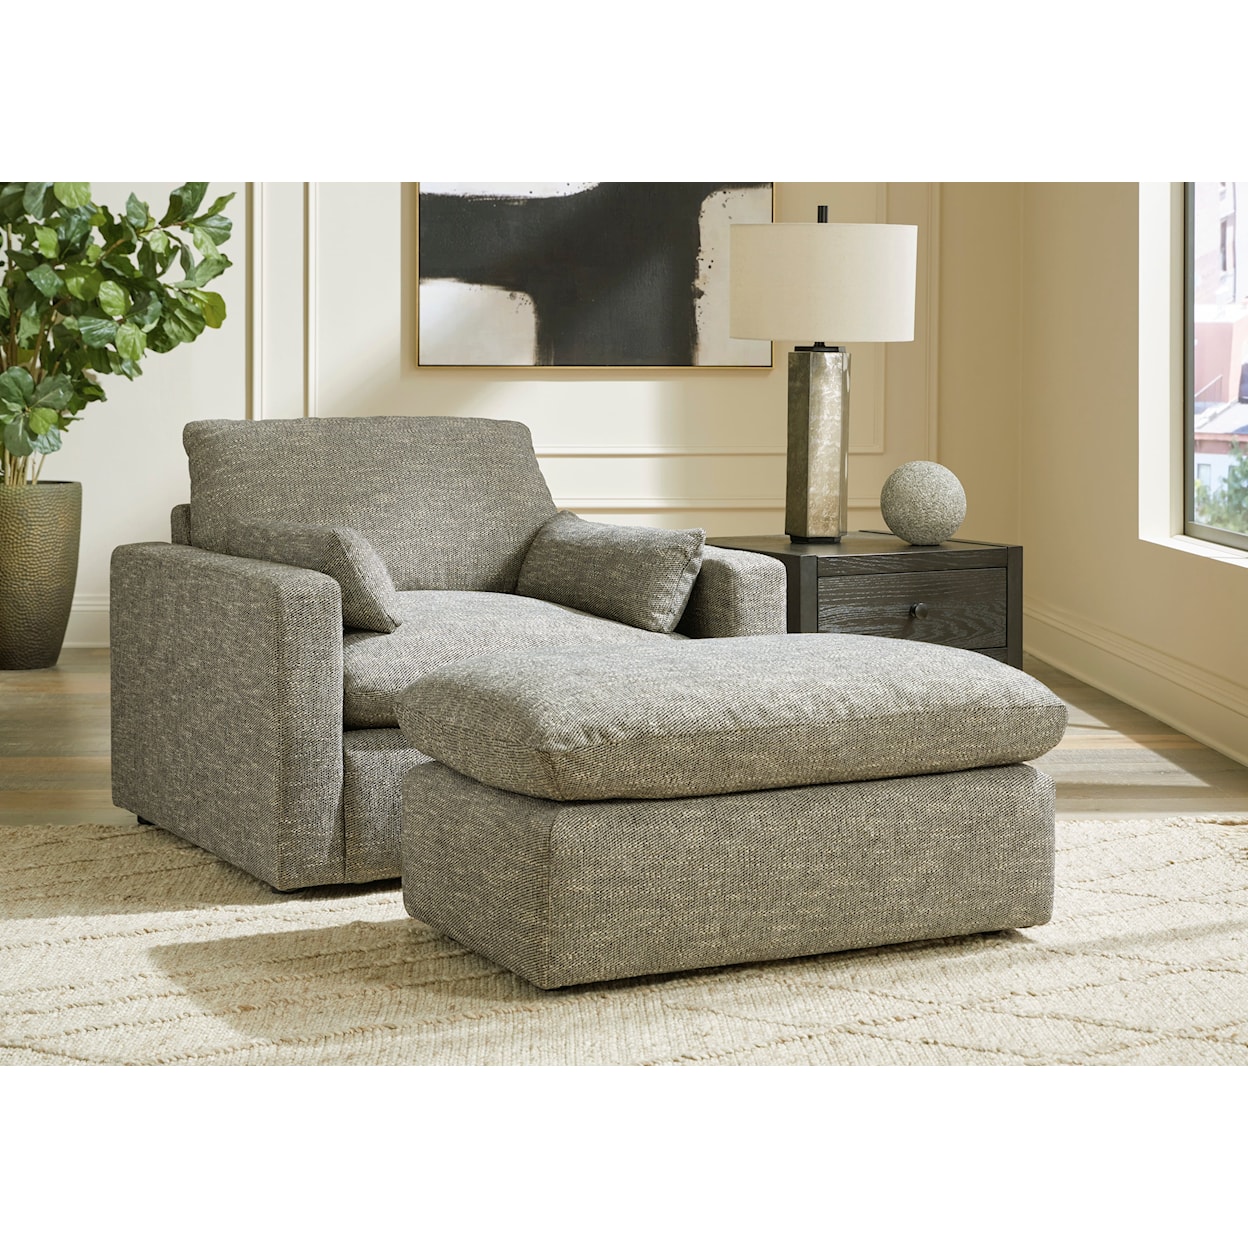 Benchcraft Dramatic Oversized Chair and Ottoman